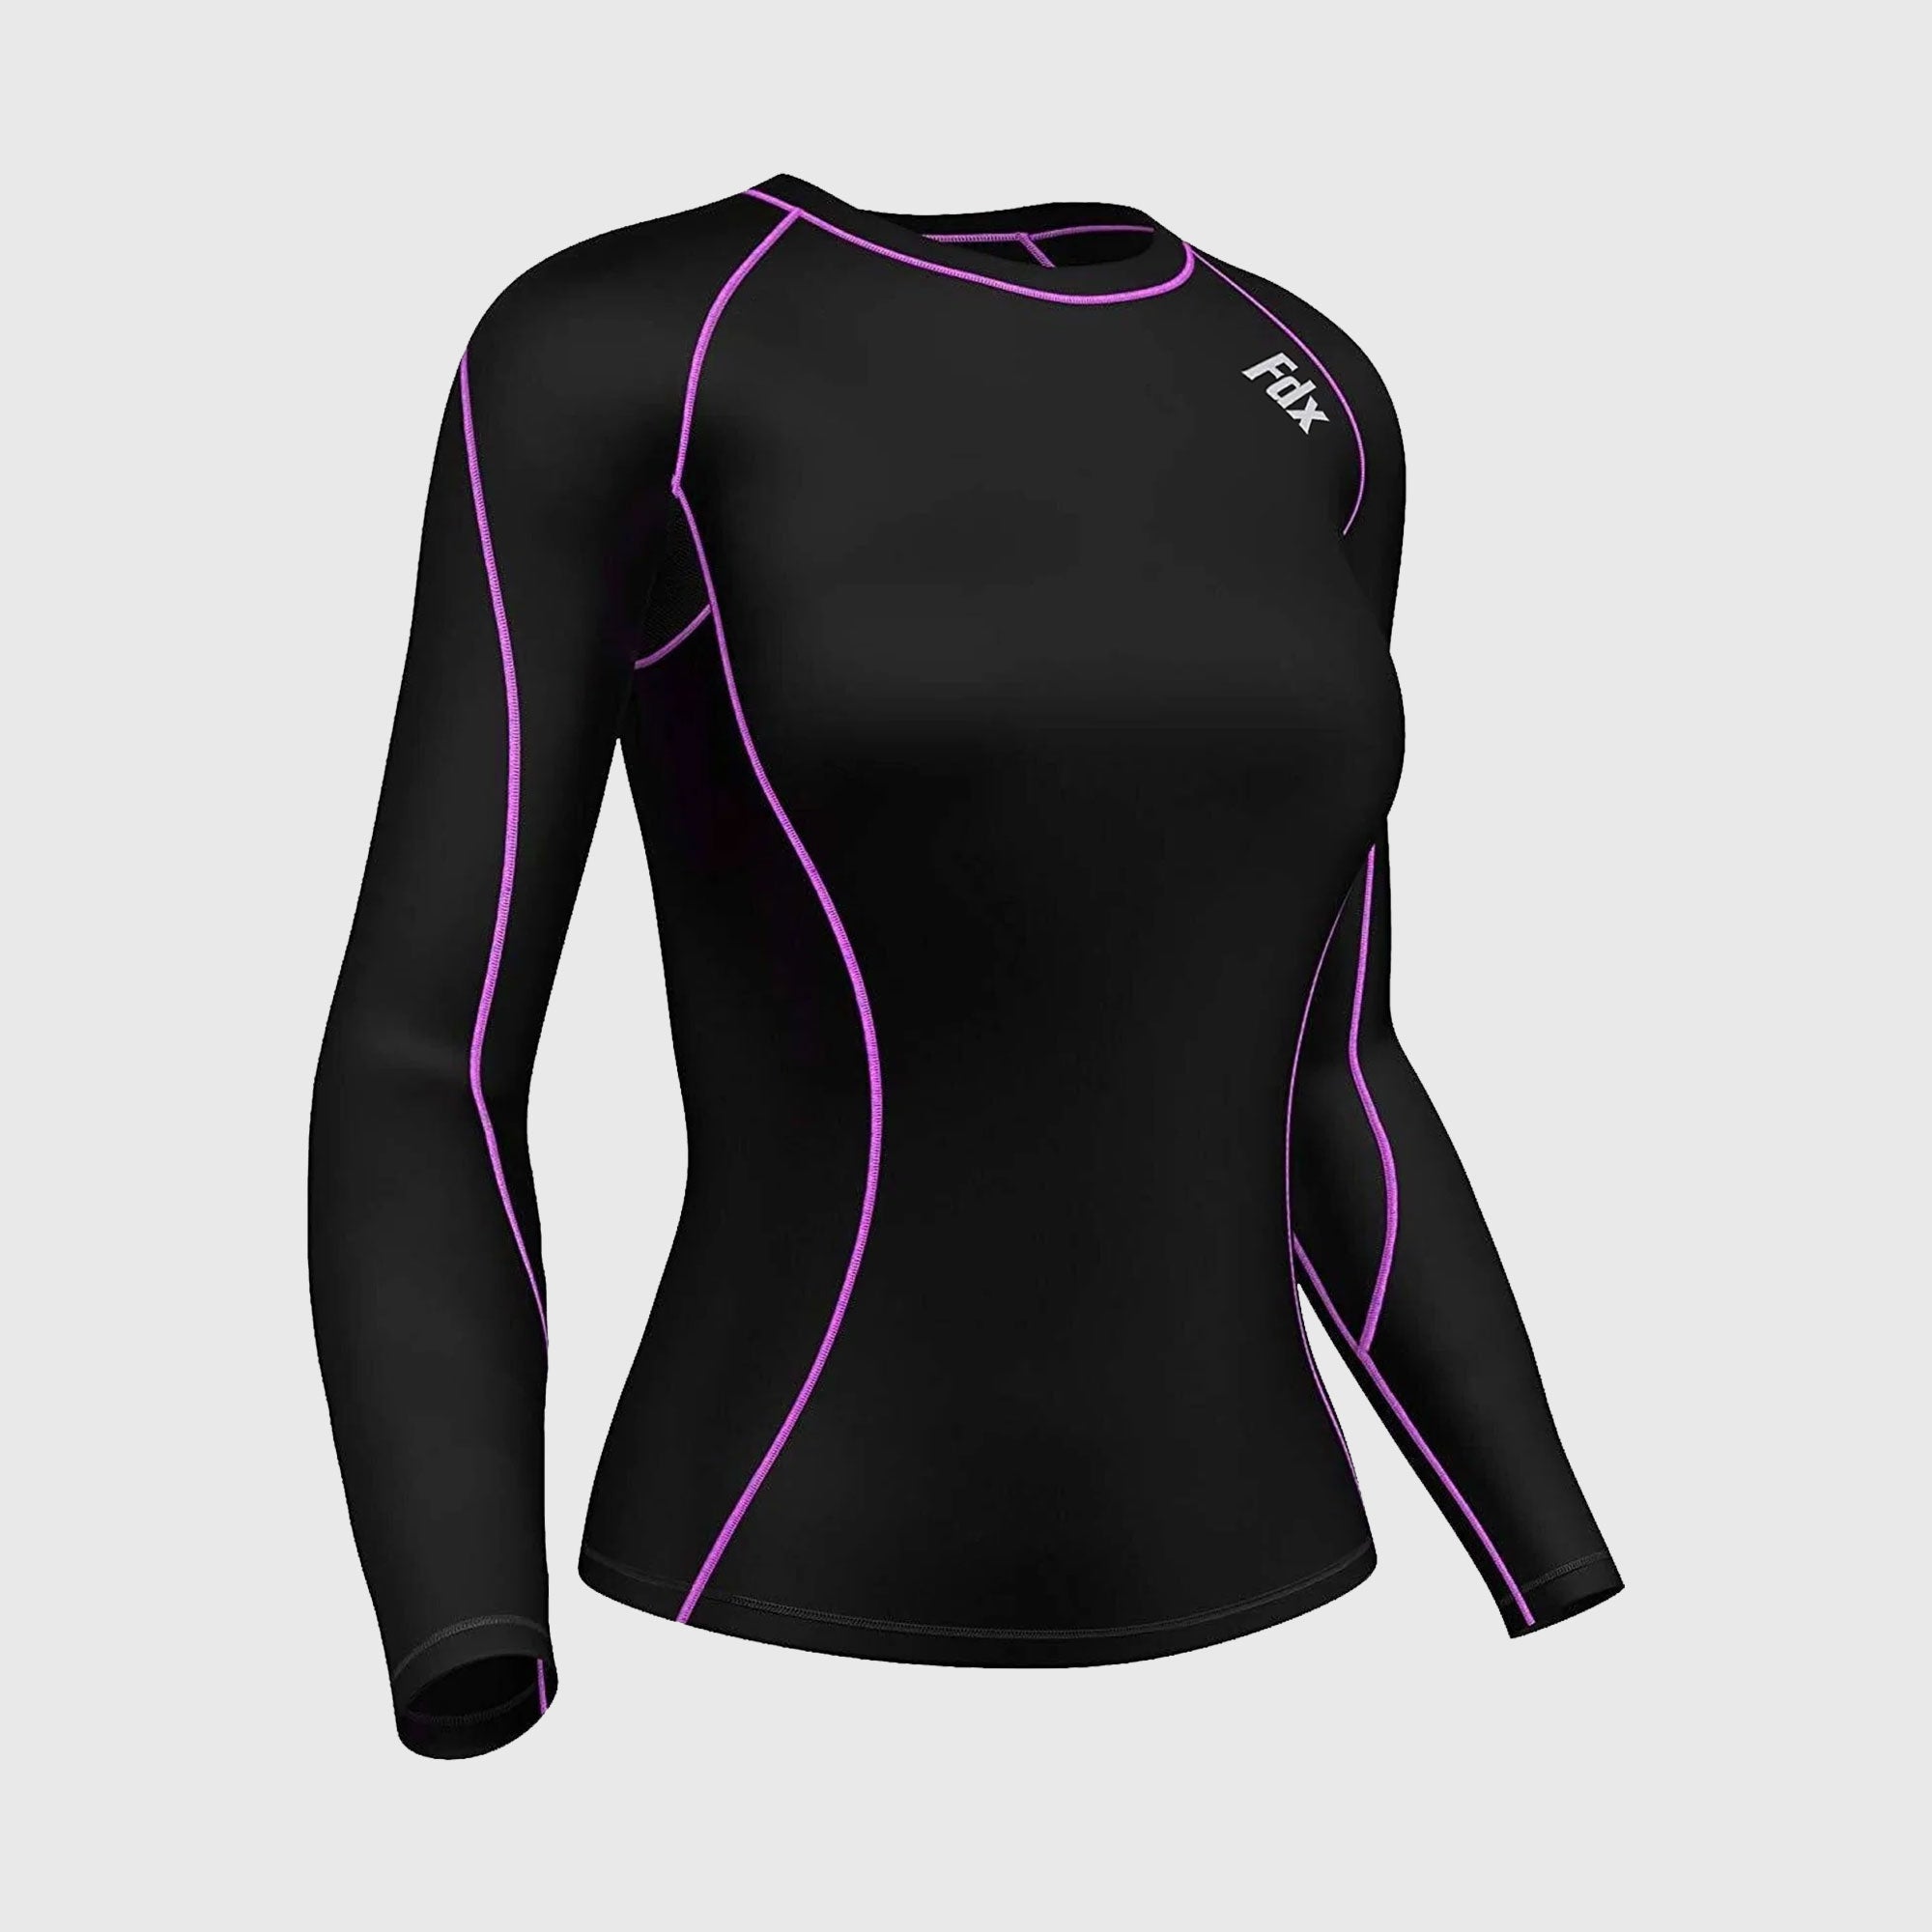 Fdx Women's Purple 7 Black Long Sleeve Ultralight Compression Top Running Gym Workout Wear Rash Guard Stretchable Breathable Quick Dry - Monarch